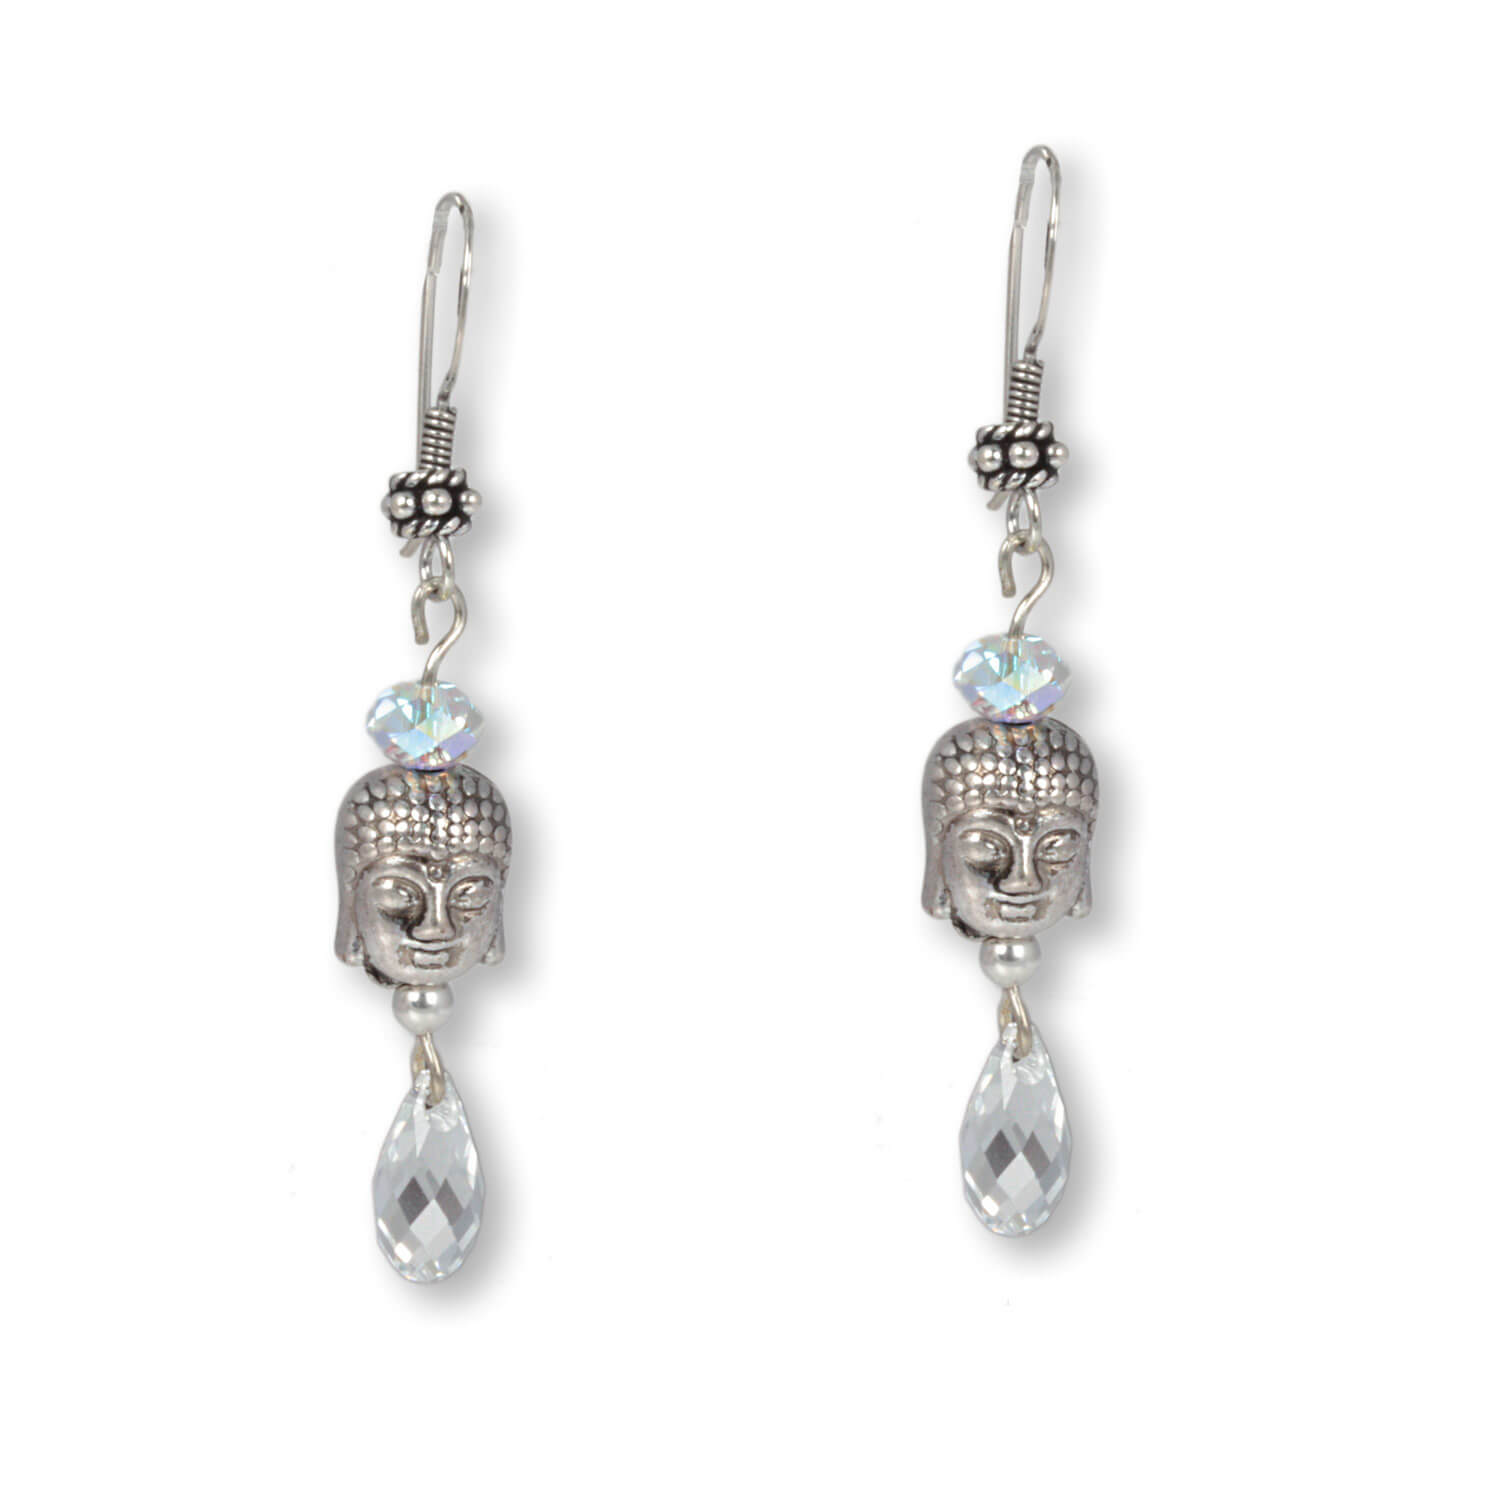 Crystal-Silver - Buddha earrings with sparkling crystals